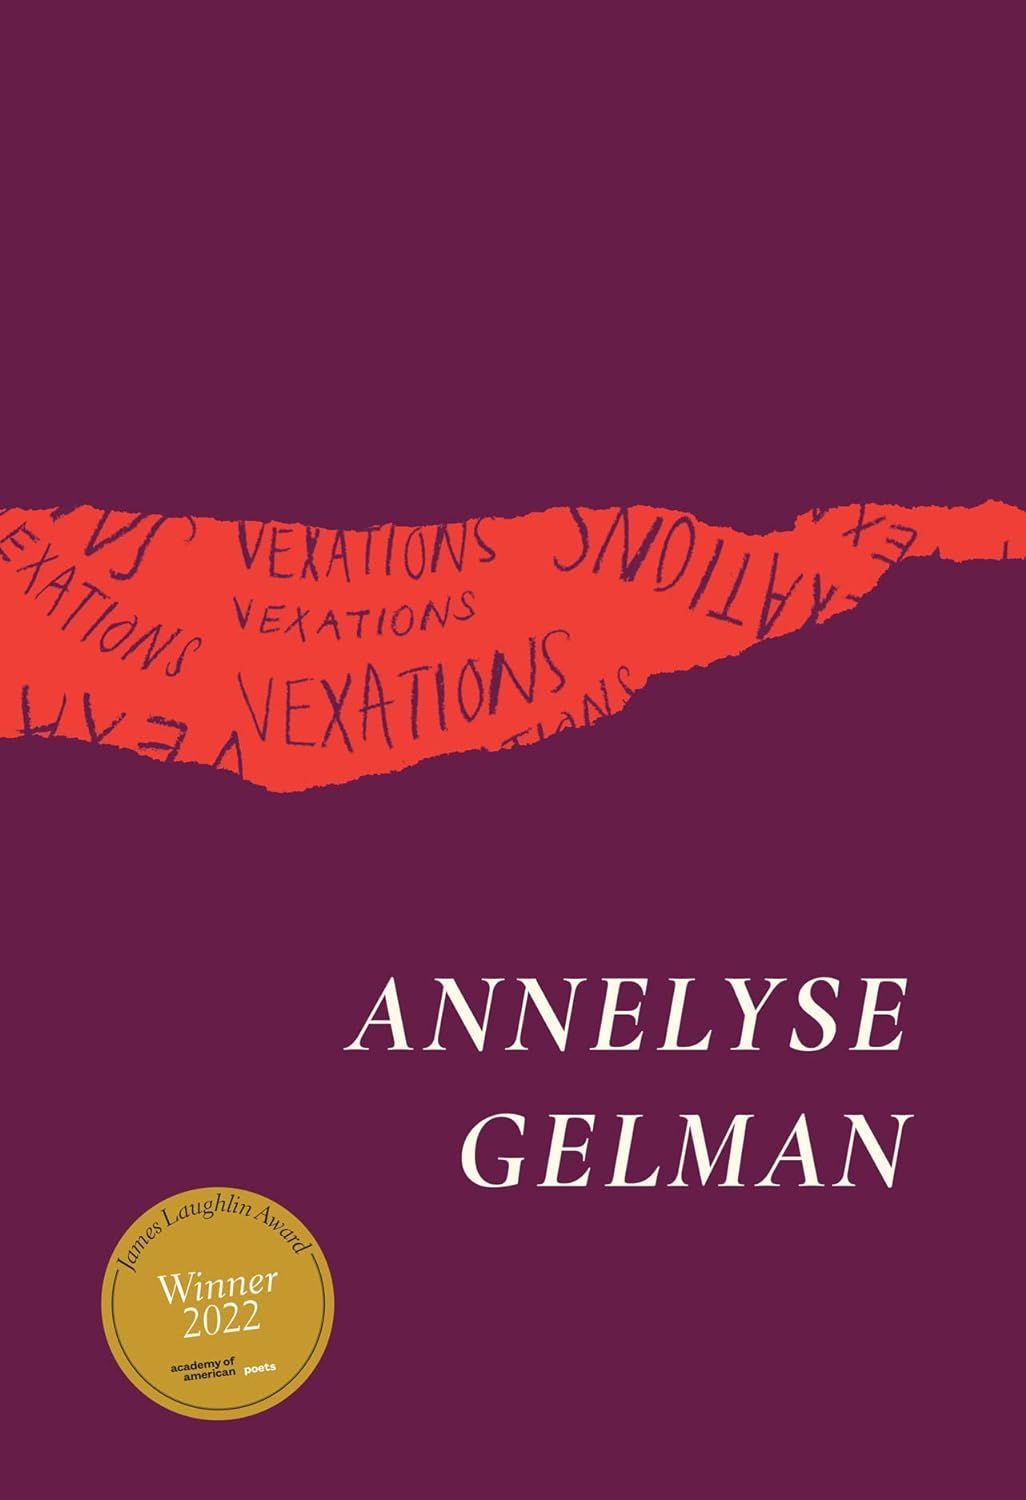 Matriarchal Flight in All Its Voices: On Annelyse Gelman’s “Vexations”